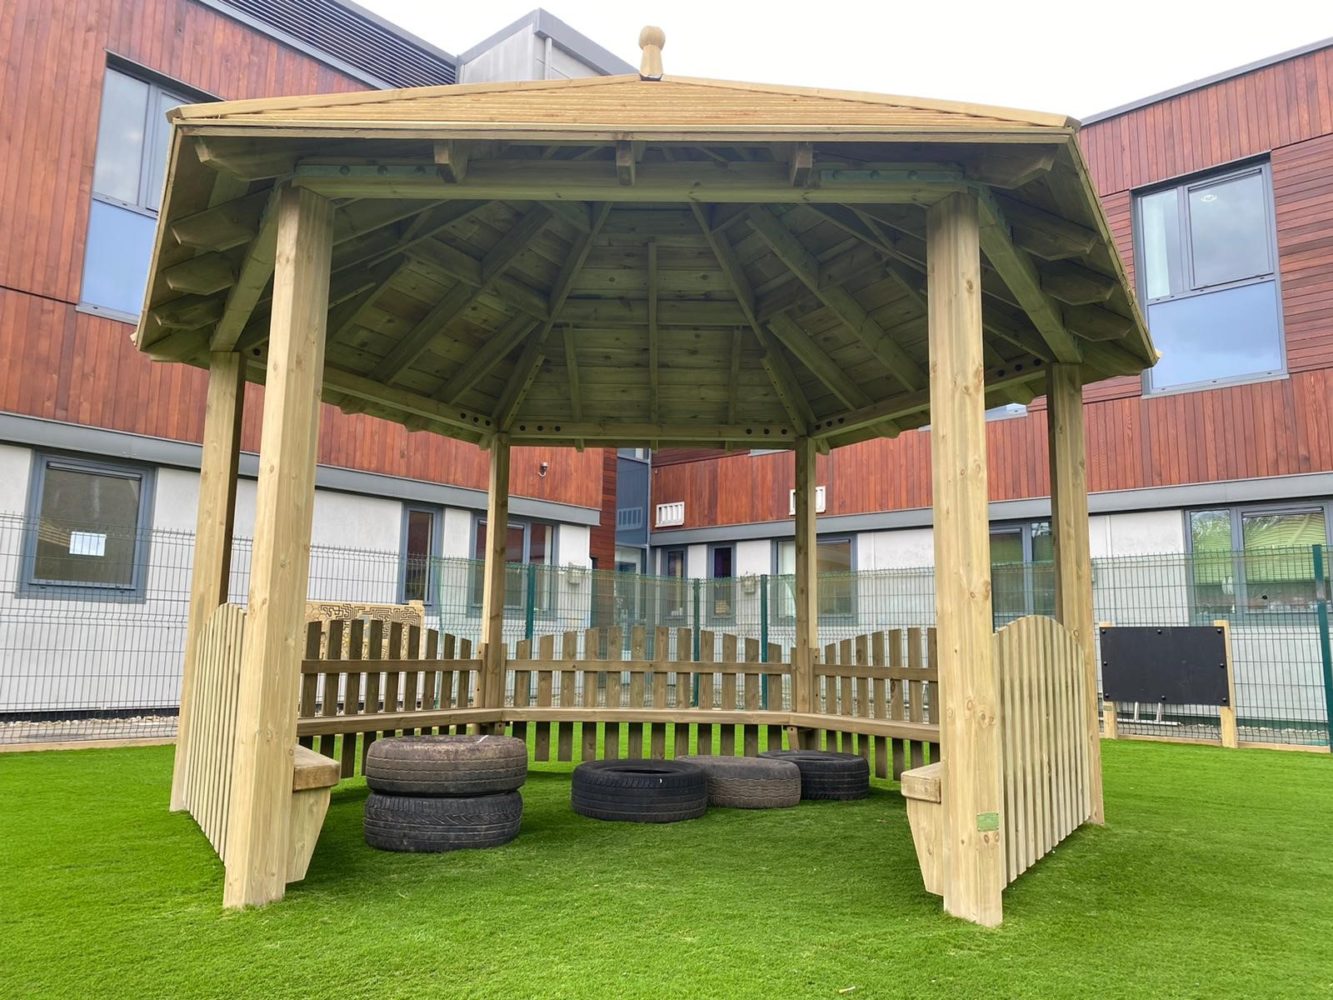 Playground equipment and sensory area installed at First Steps Day Nursery